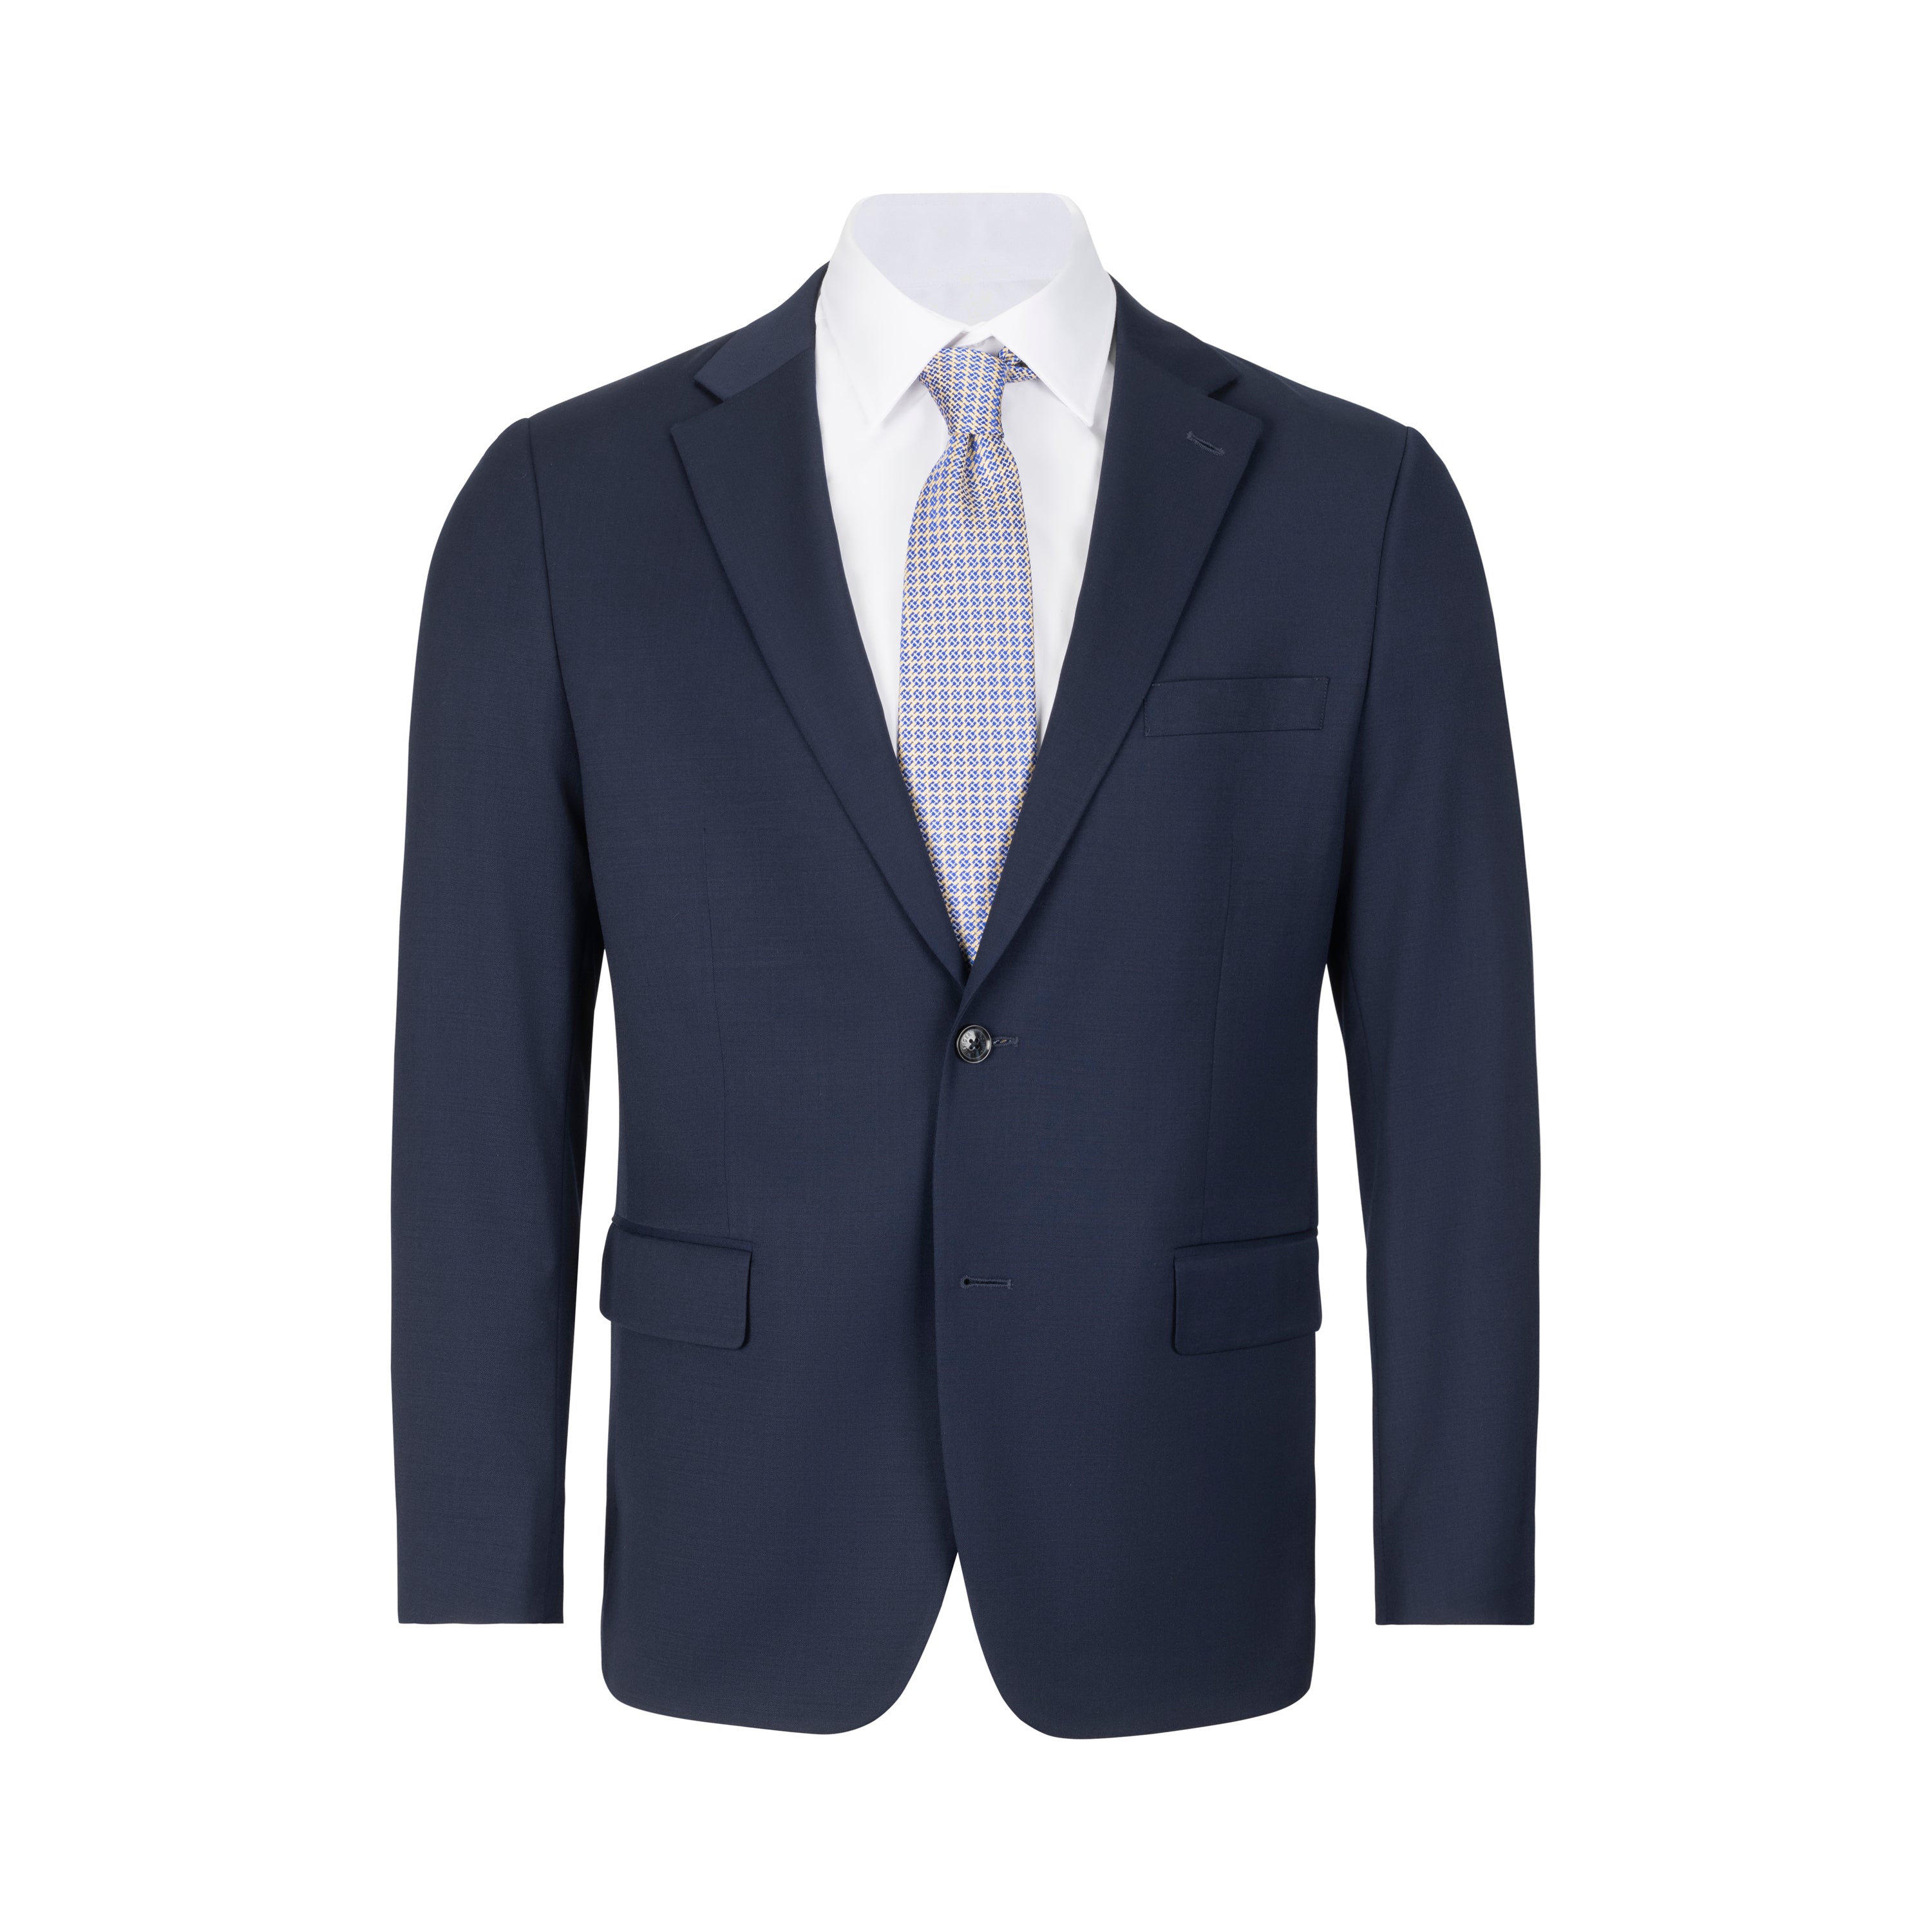 HILFIGER NAVY SUIT SEPARATES JACKET – Miltons - The Store for